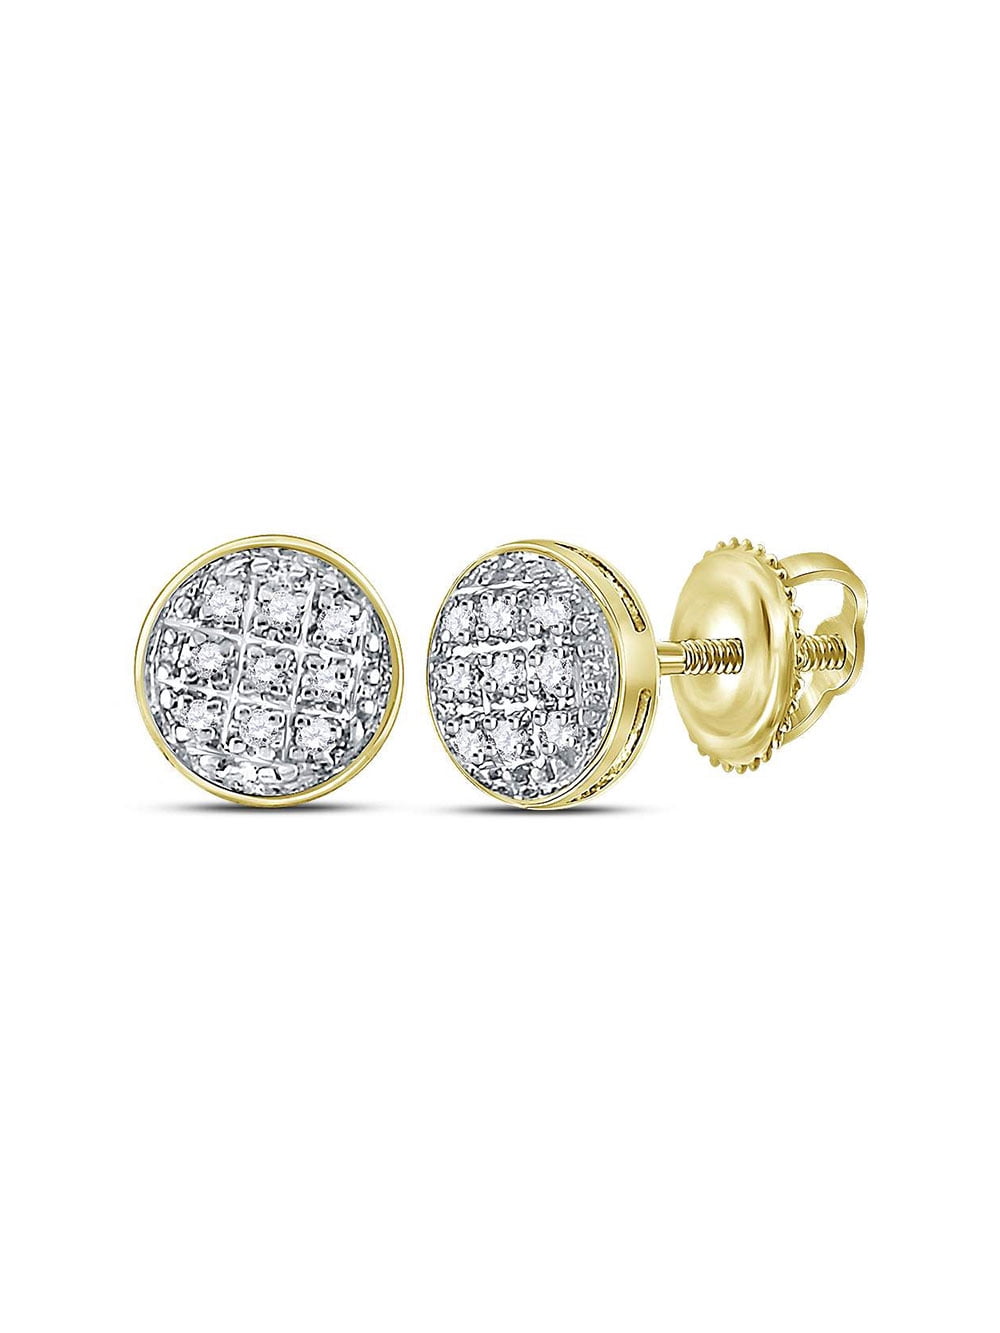 Mens Womens 10K Yellow Gold Over 1.60 Ct Diamond Pave Circle Round Stud Earrings 